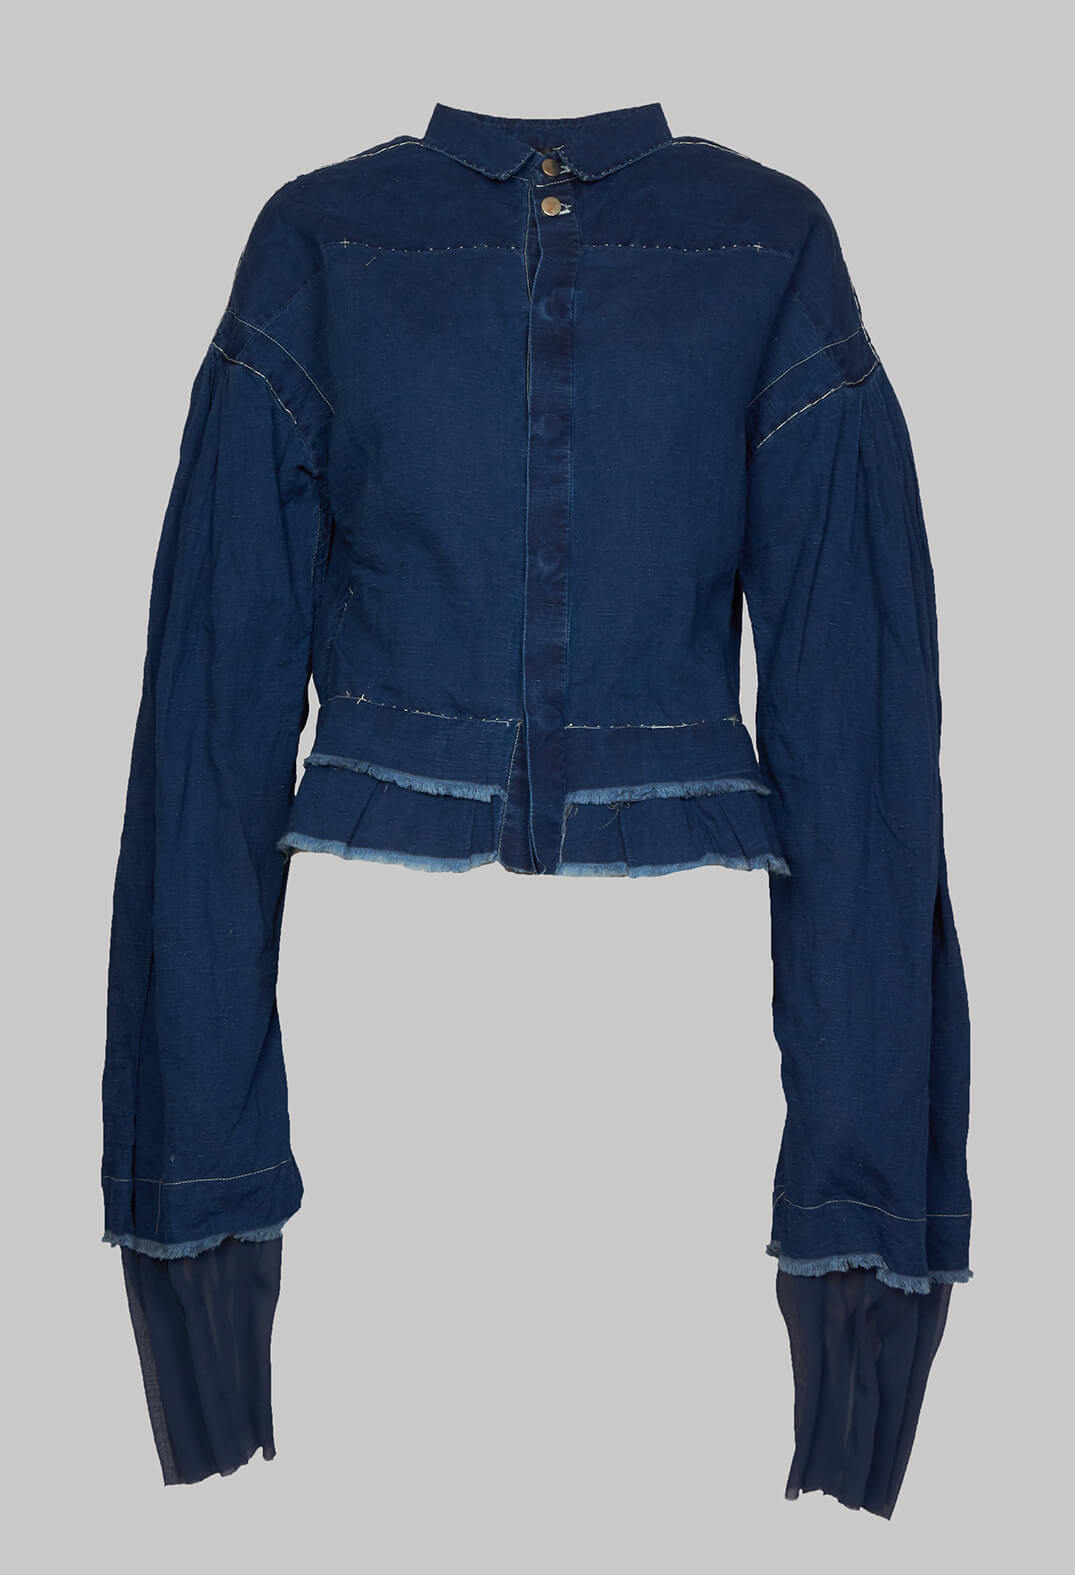 Wide Sleeve Shirt with Distressed Detail in Dark Navy